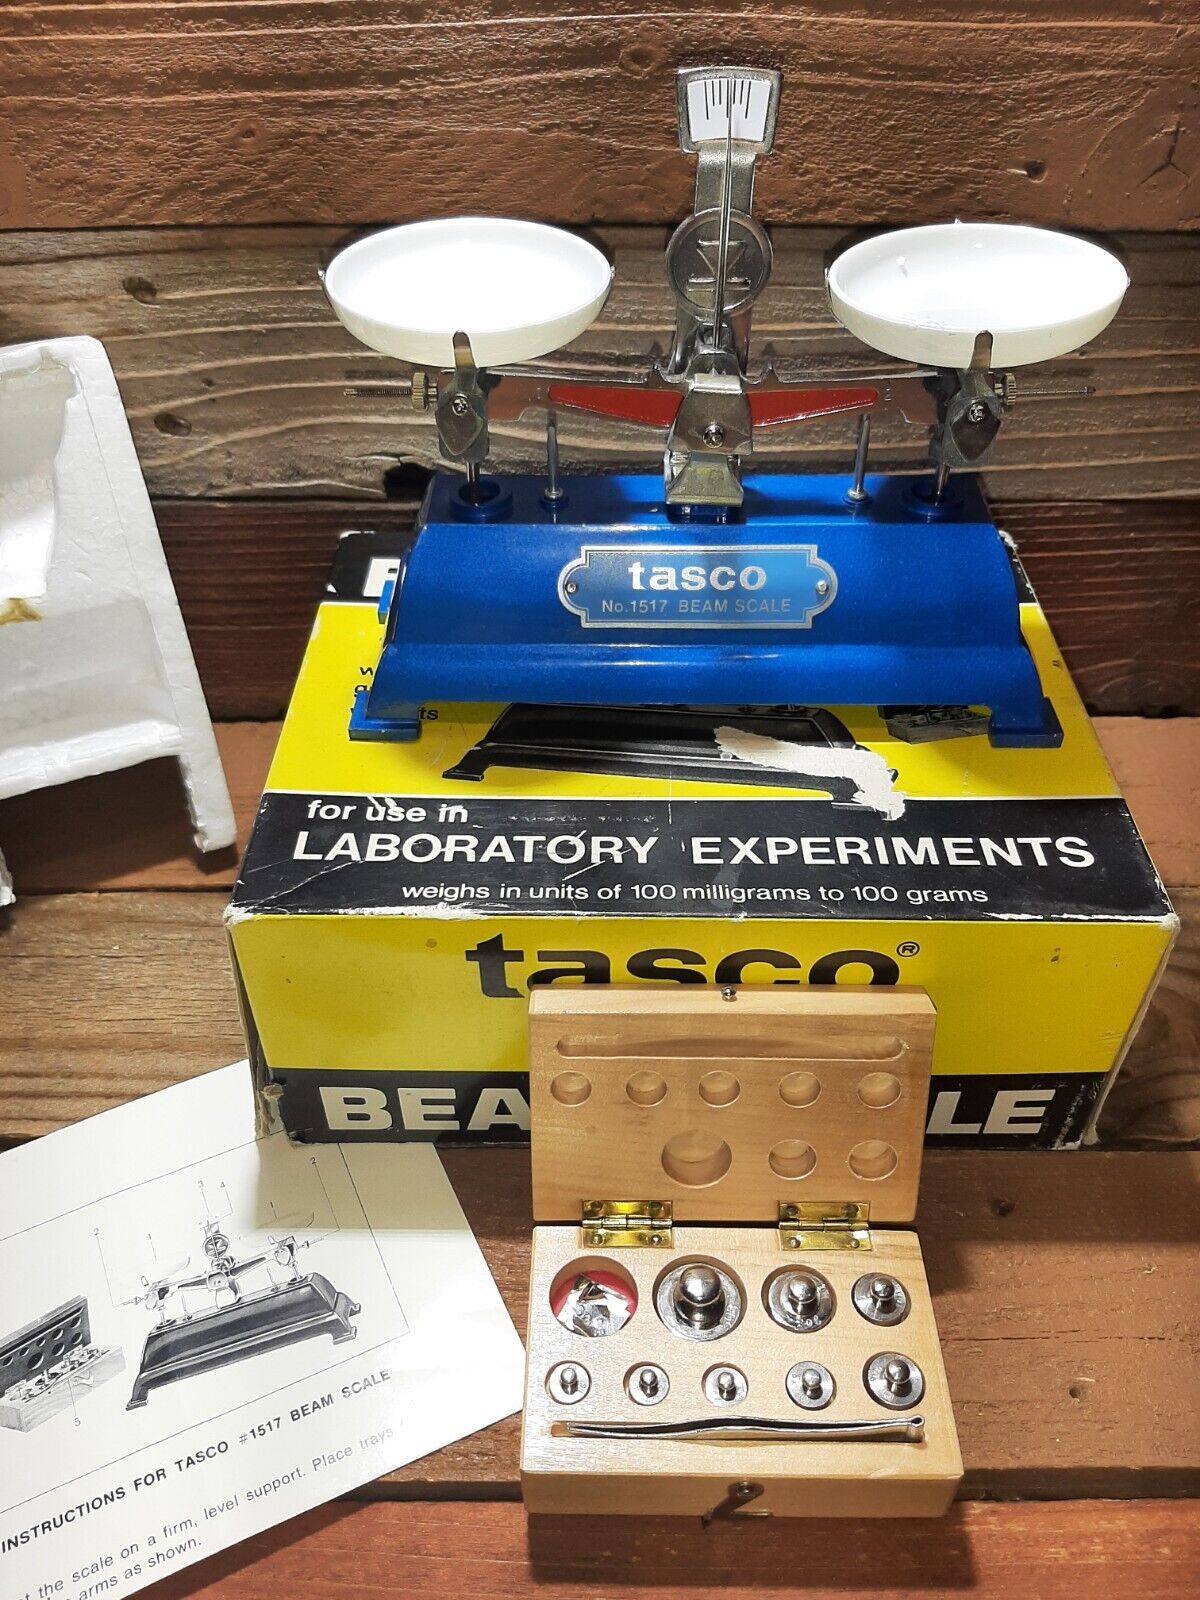 Vtg Tasco No 1517 Beam Scale Laboratory With Gram Weights 100 Mil to 100 G 1968